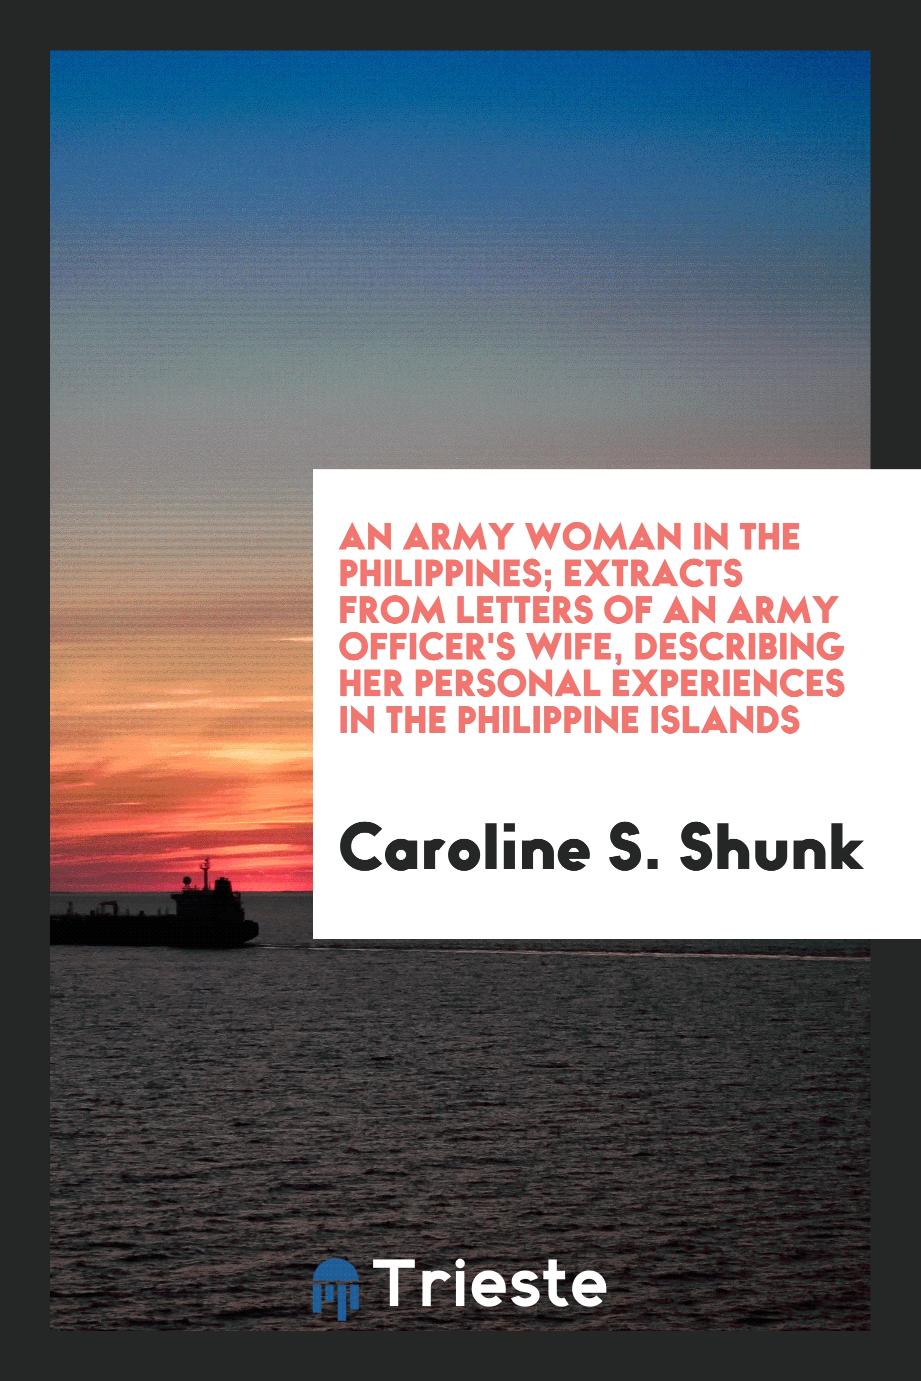 An army woman in the Philippines; Extracts from letters of an army officer's wife, describing her personal experiences in the Philippine Islands